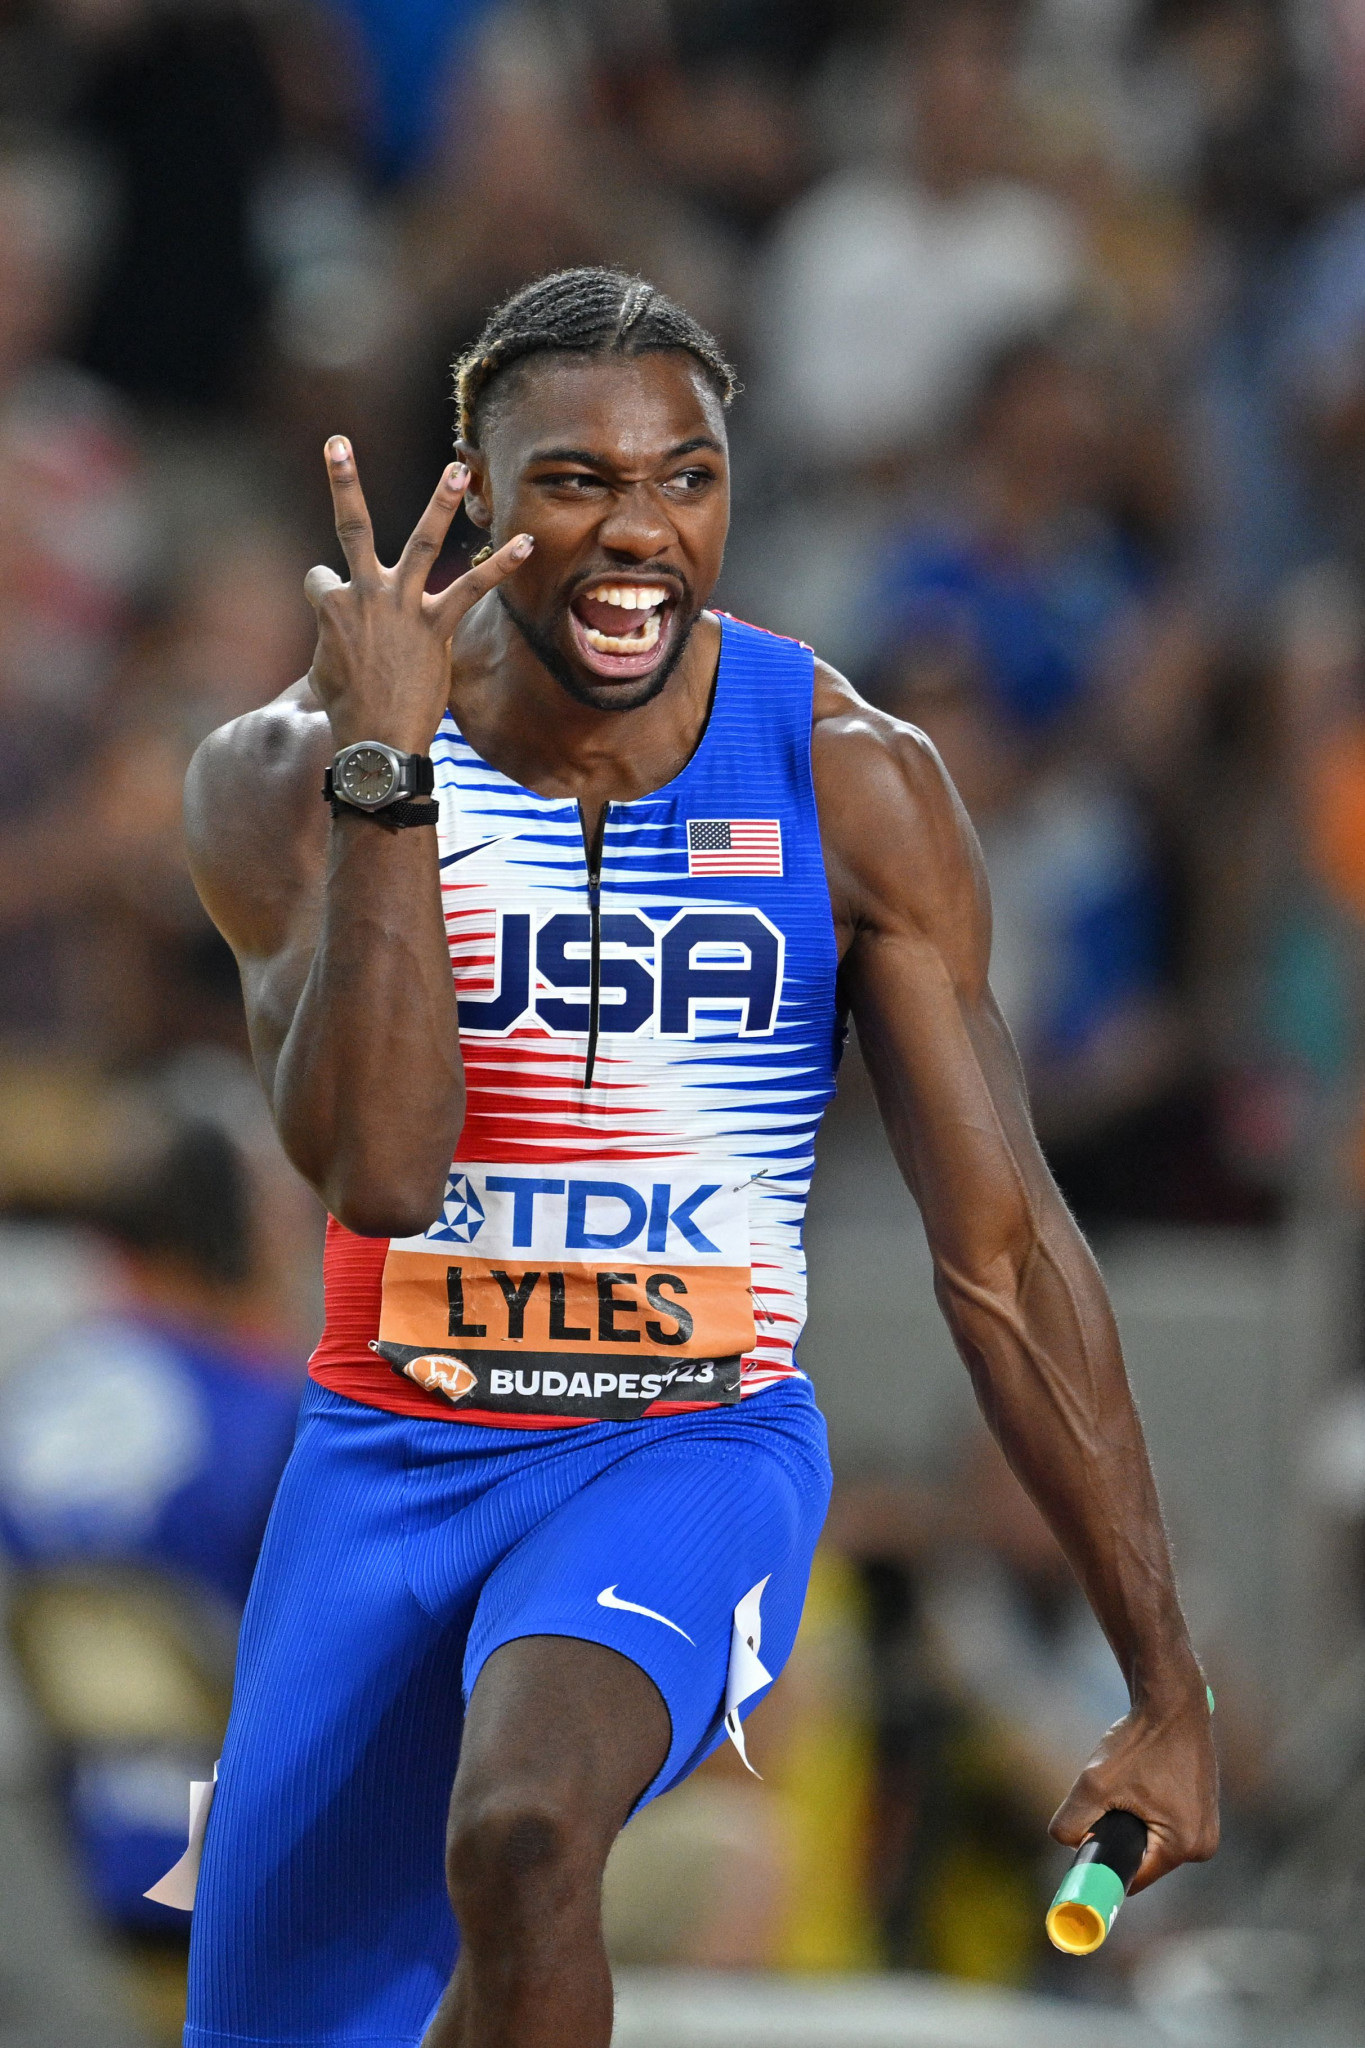 Noah Lyles of the United States is another multiple gold medallist in Budapest, anchoring his country to men's 4x100m gold to add to his individual 100m and 200m victories ©Getty Images